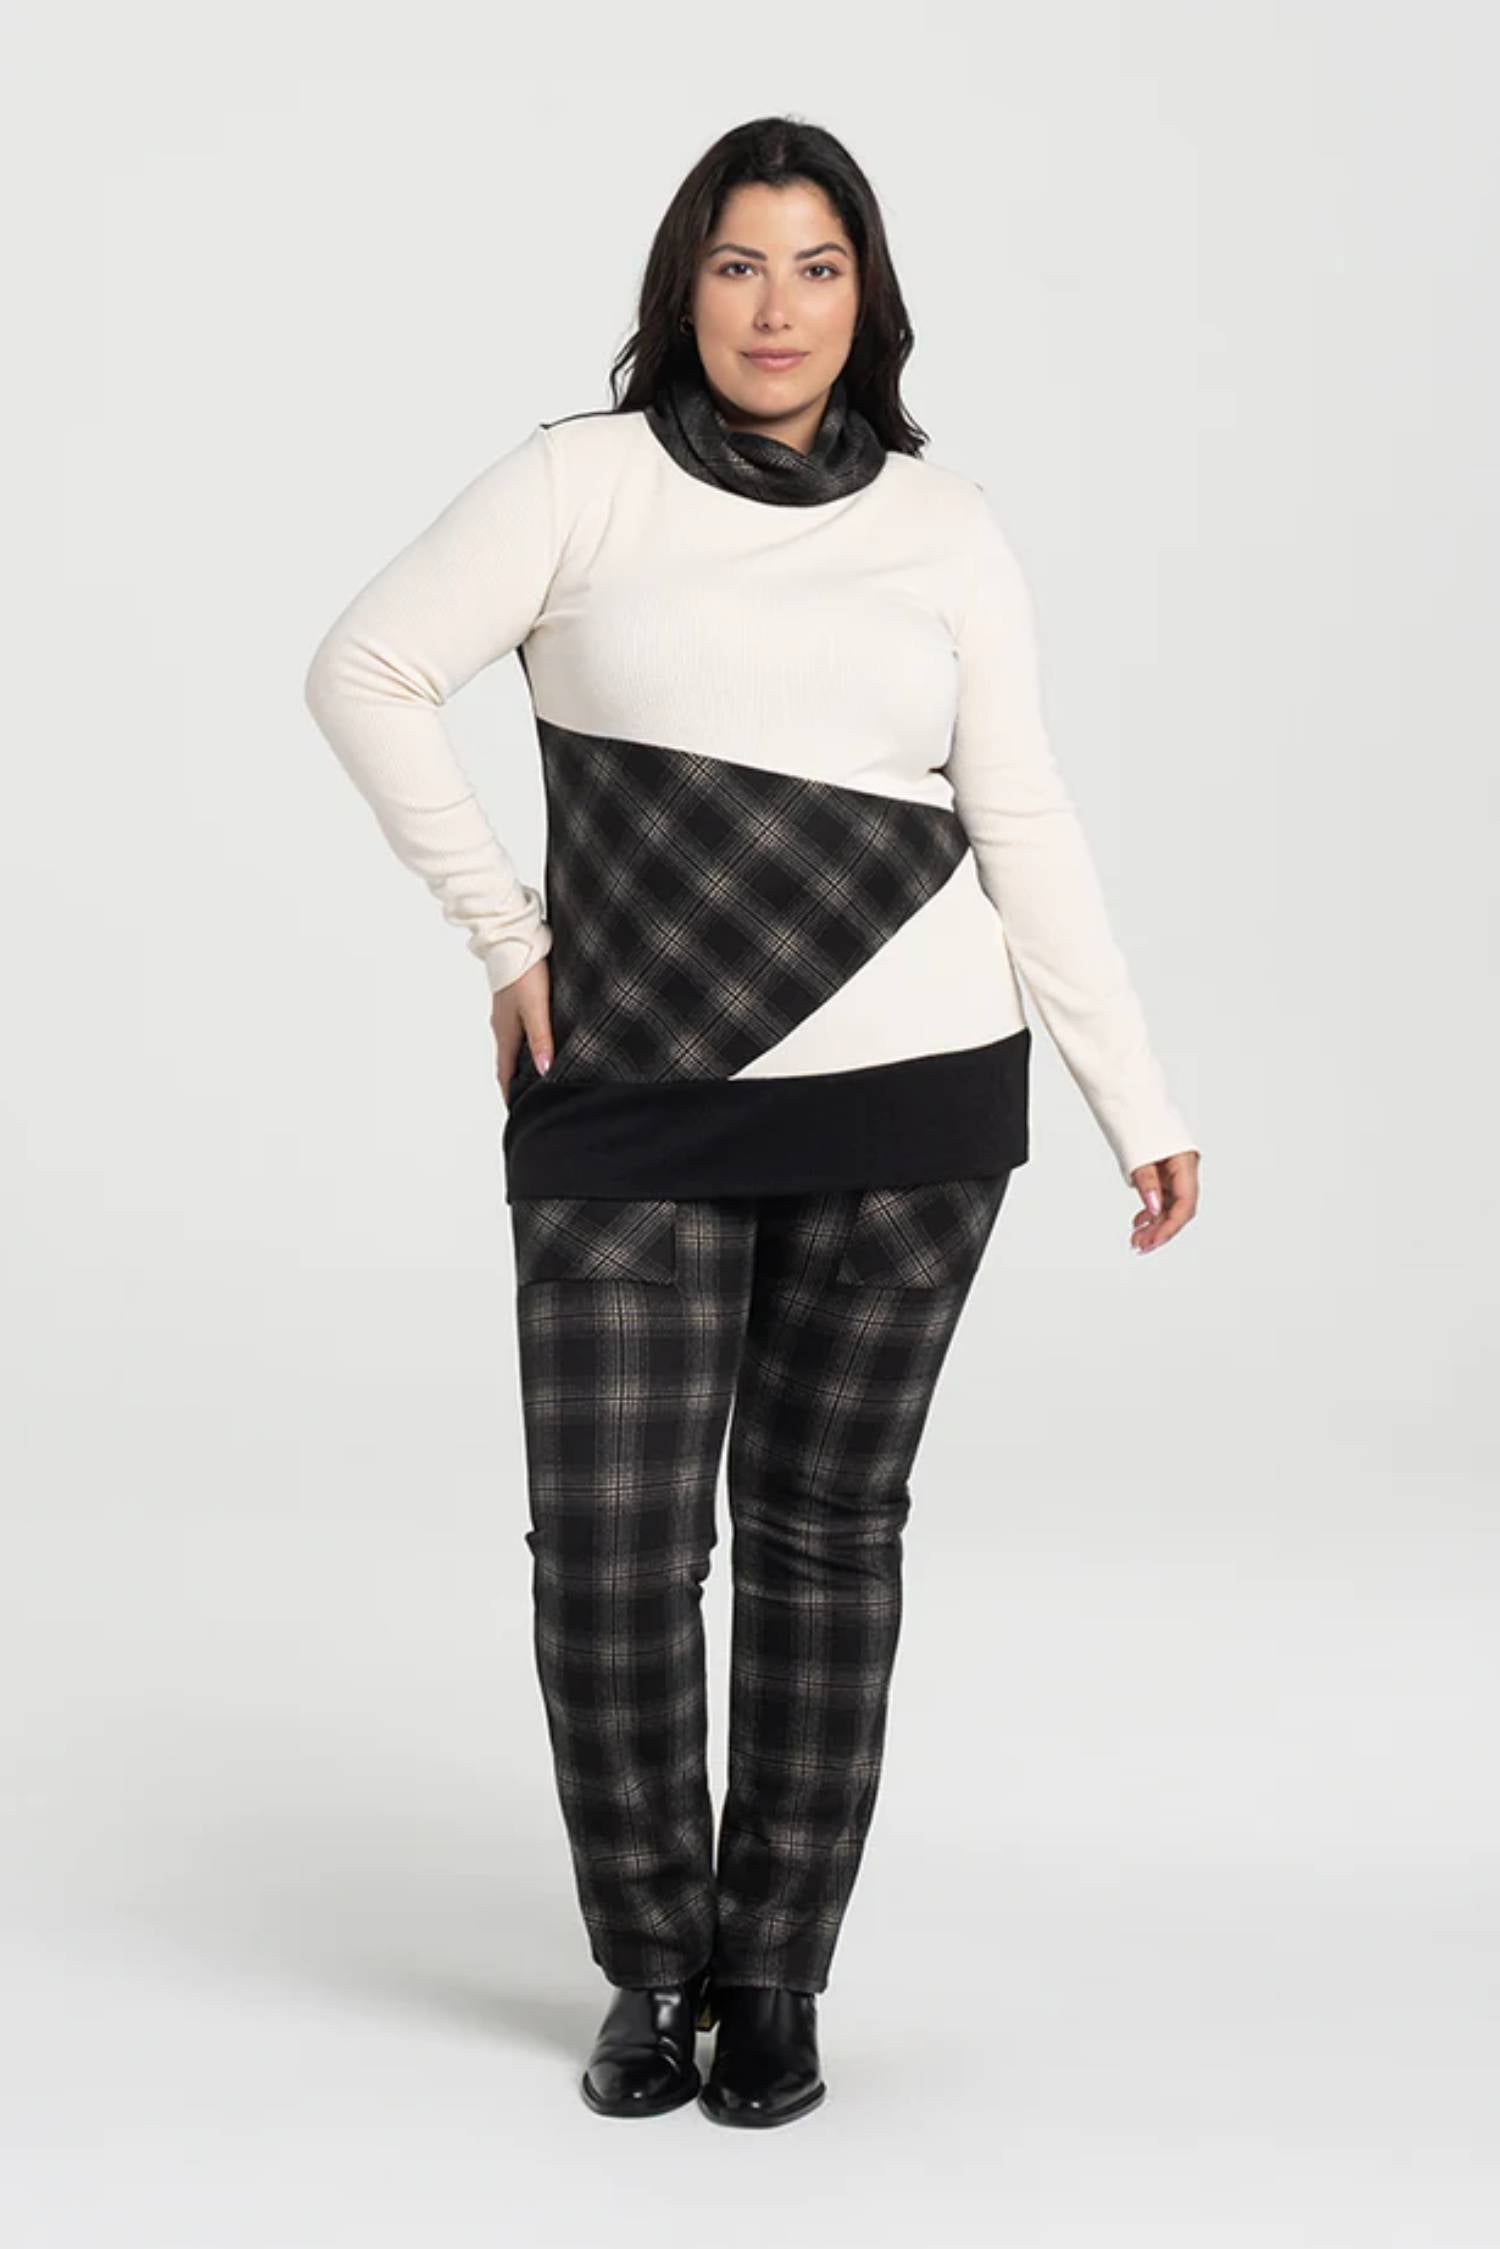 Irena Pants by Kollontai, Black, plaid, pull on waist, slim fit, patch pockets, sizes XS to XXL, made in Montreal